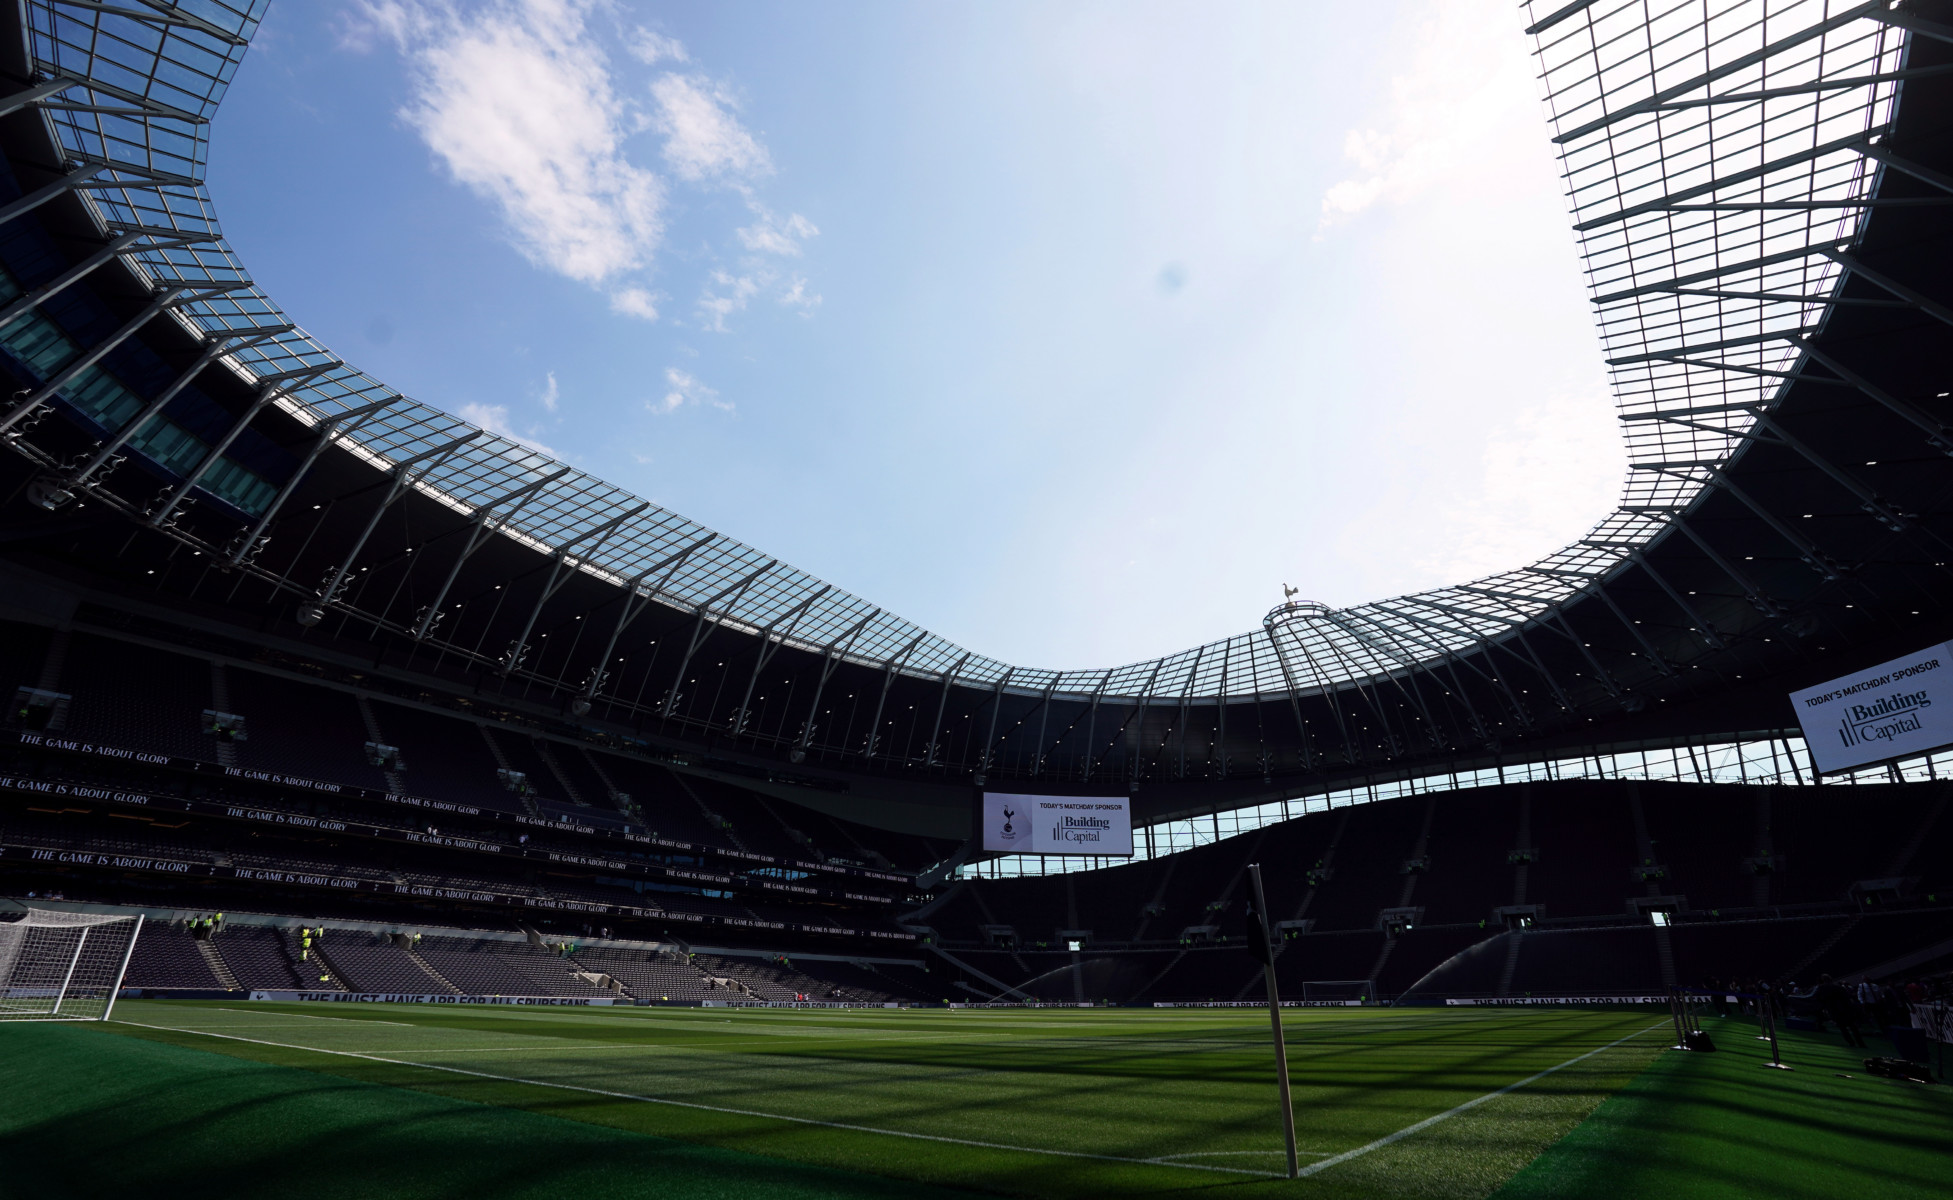 Denton had managed to sneak into the front row of the corporate section at the new Tottenham Hotspur stadium